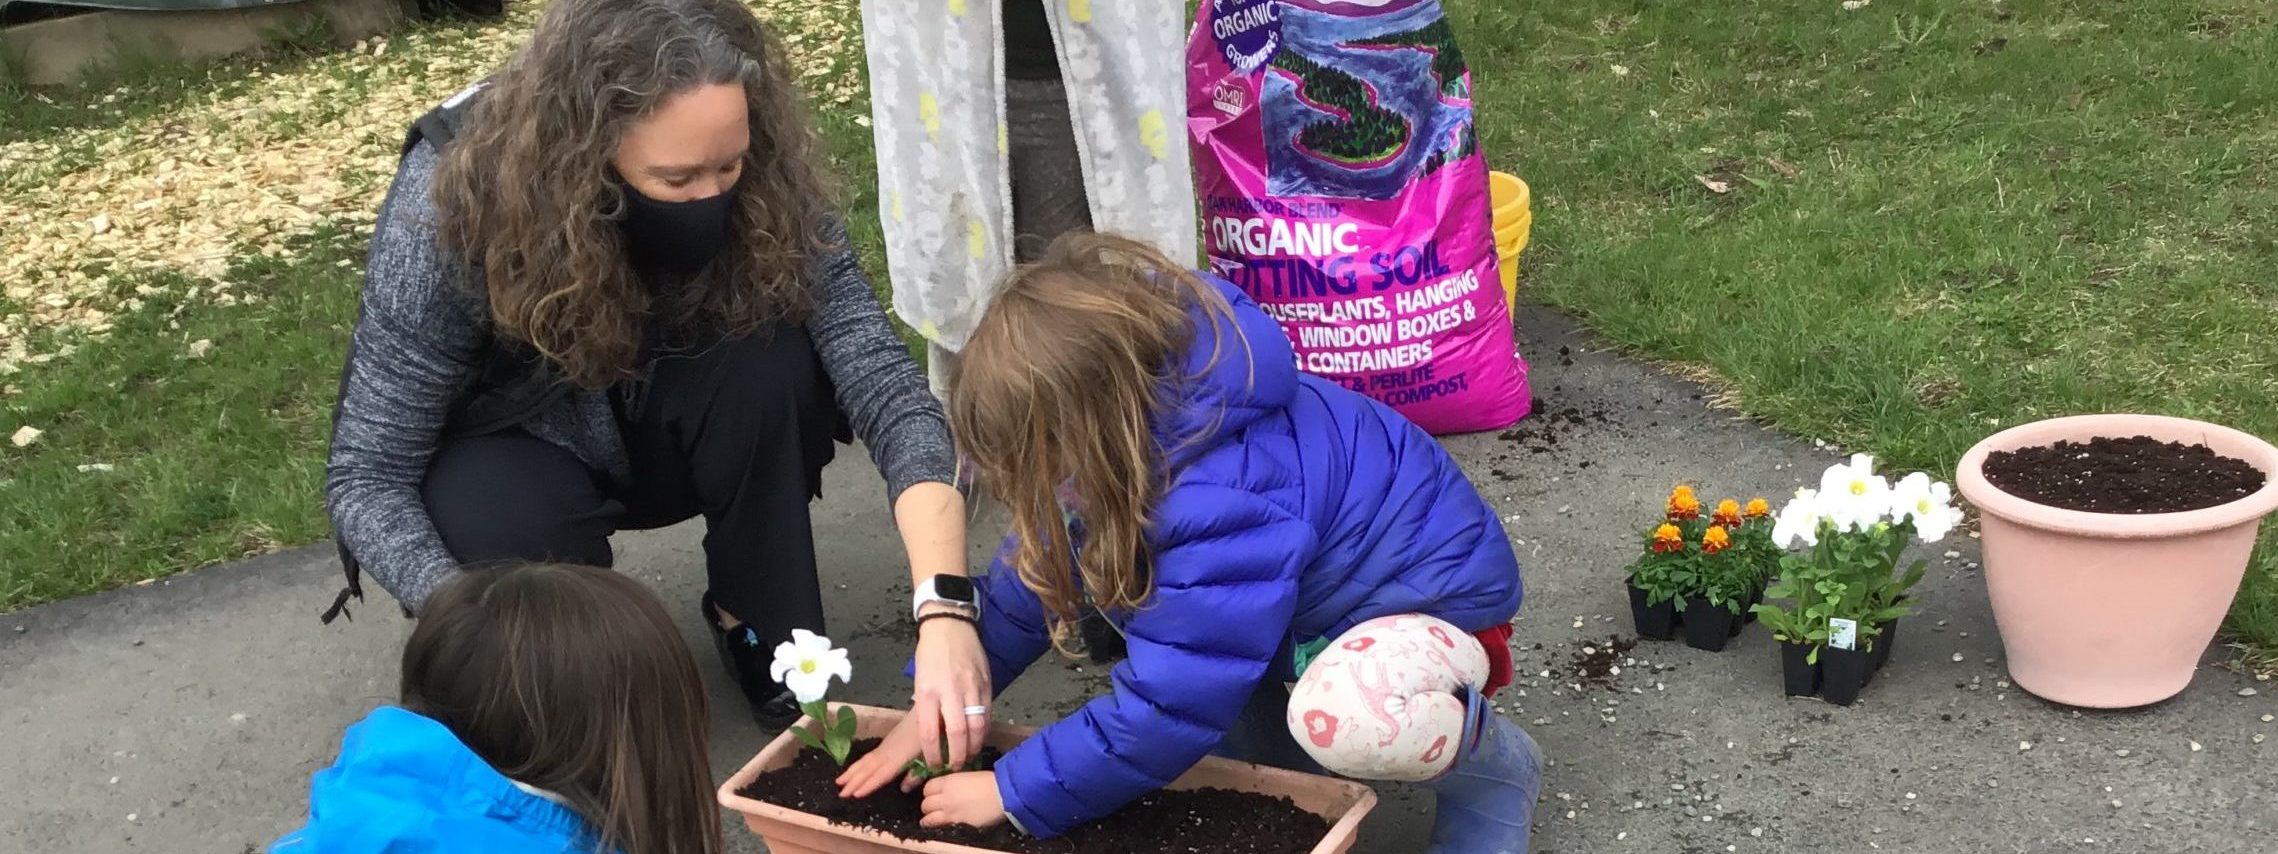 Smiling masked woman plants flowers with young children